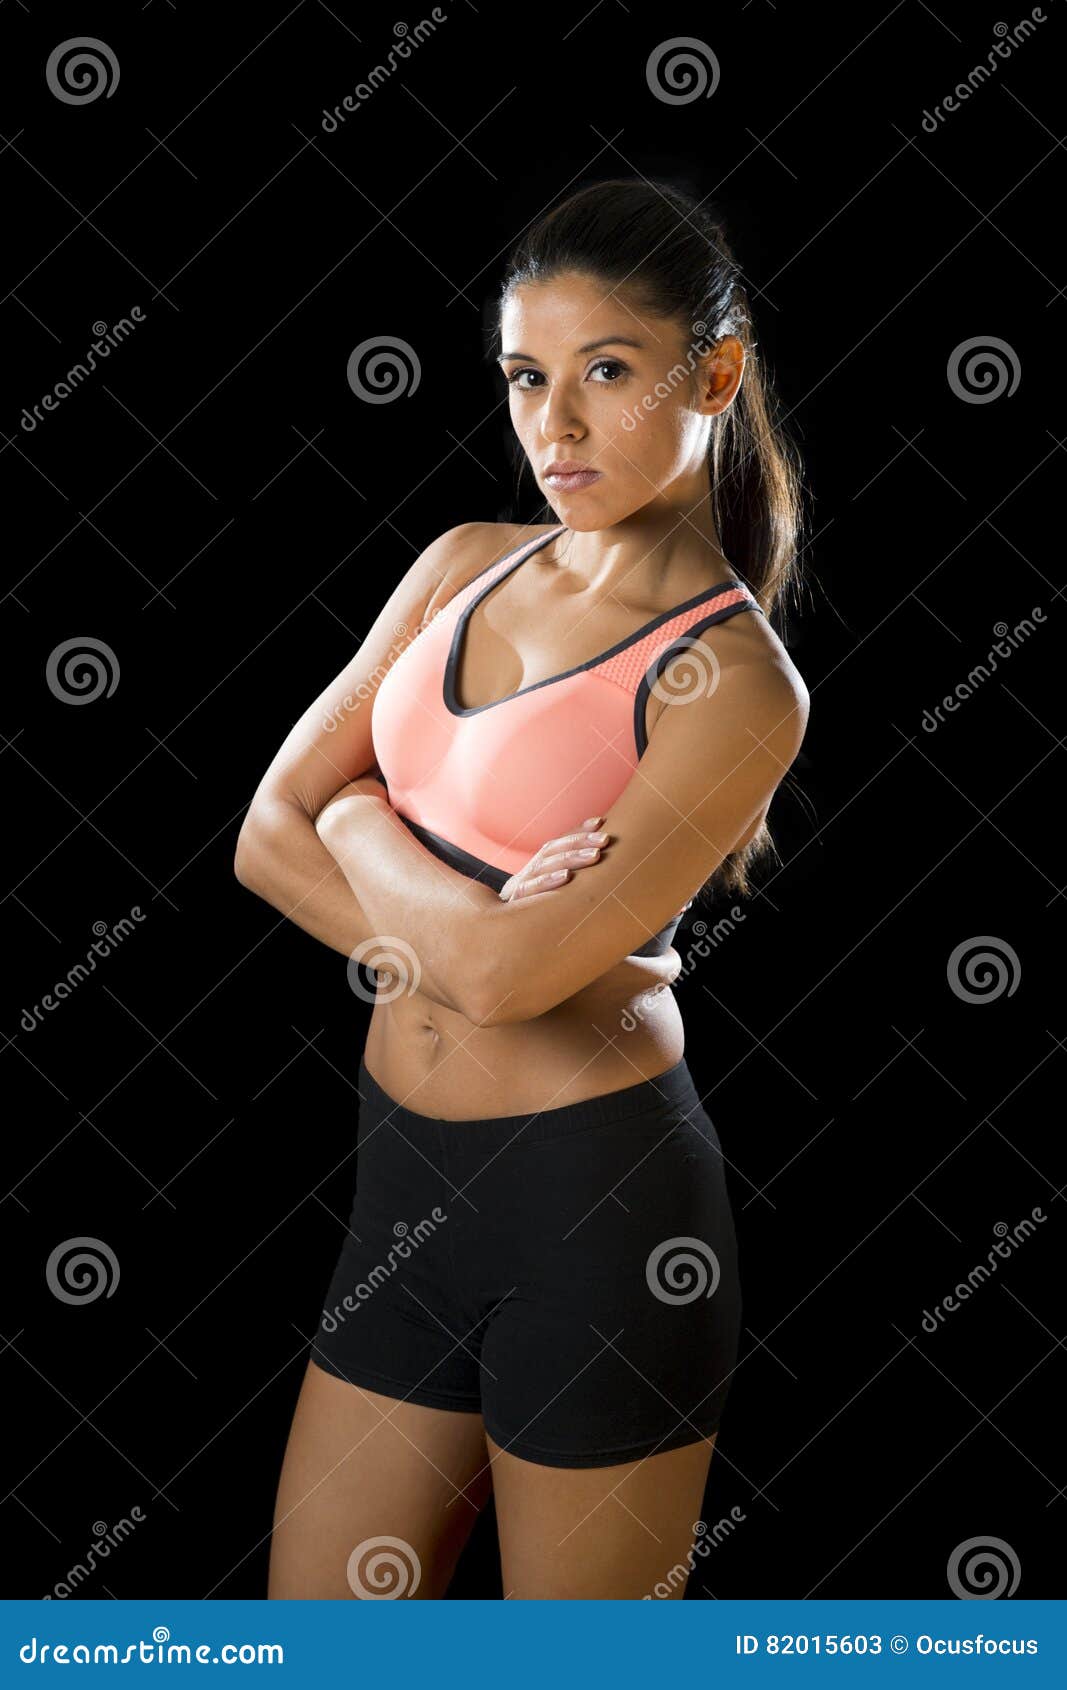 Latin Sport Woman Posing In Fierce And Badass Face Expression With Fit